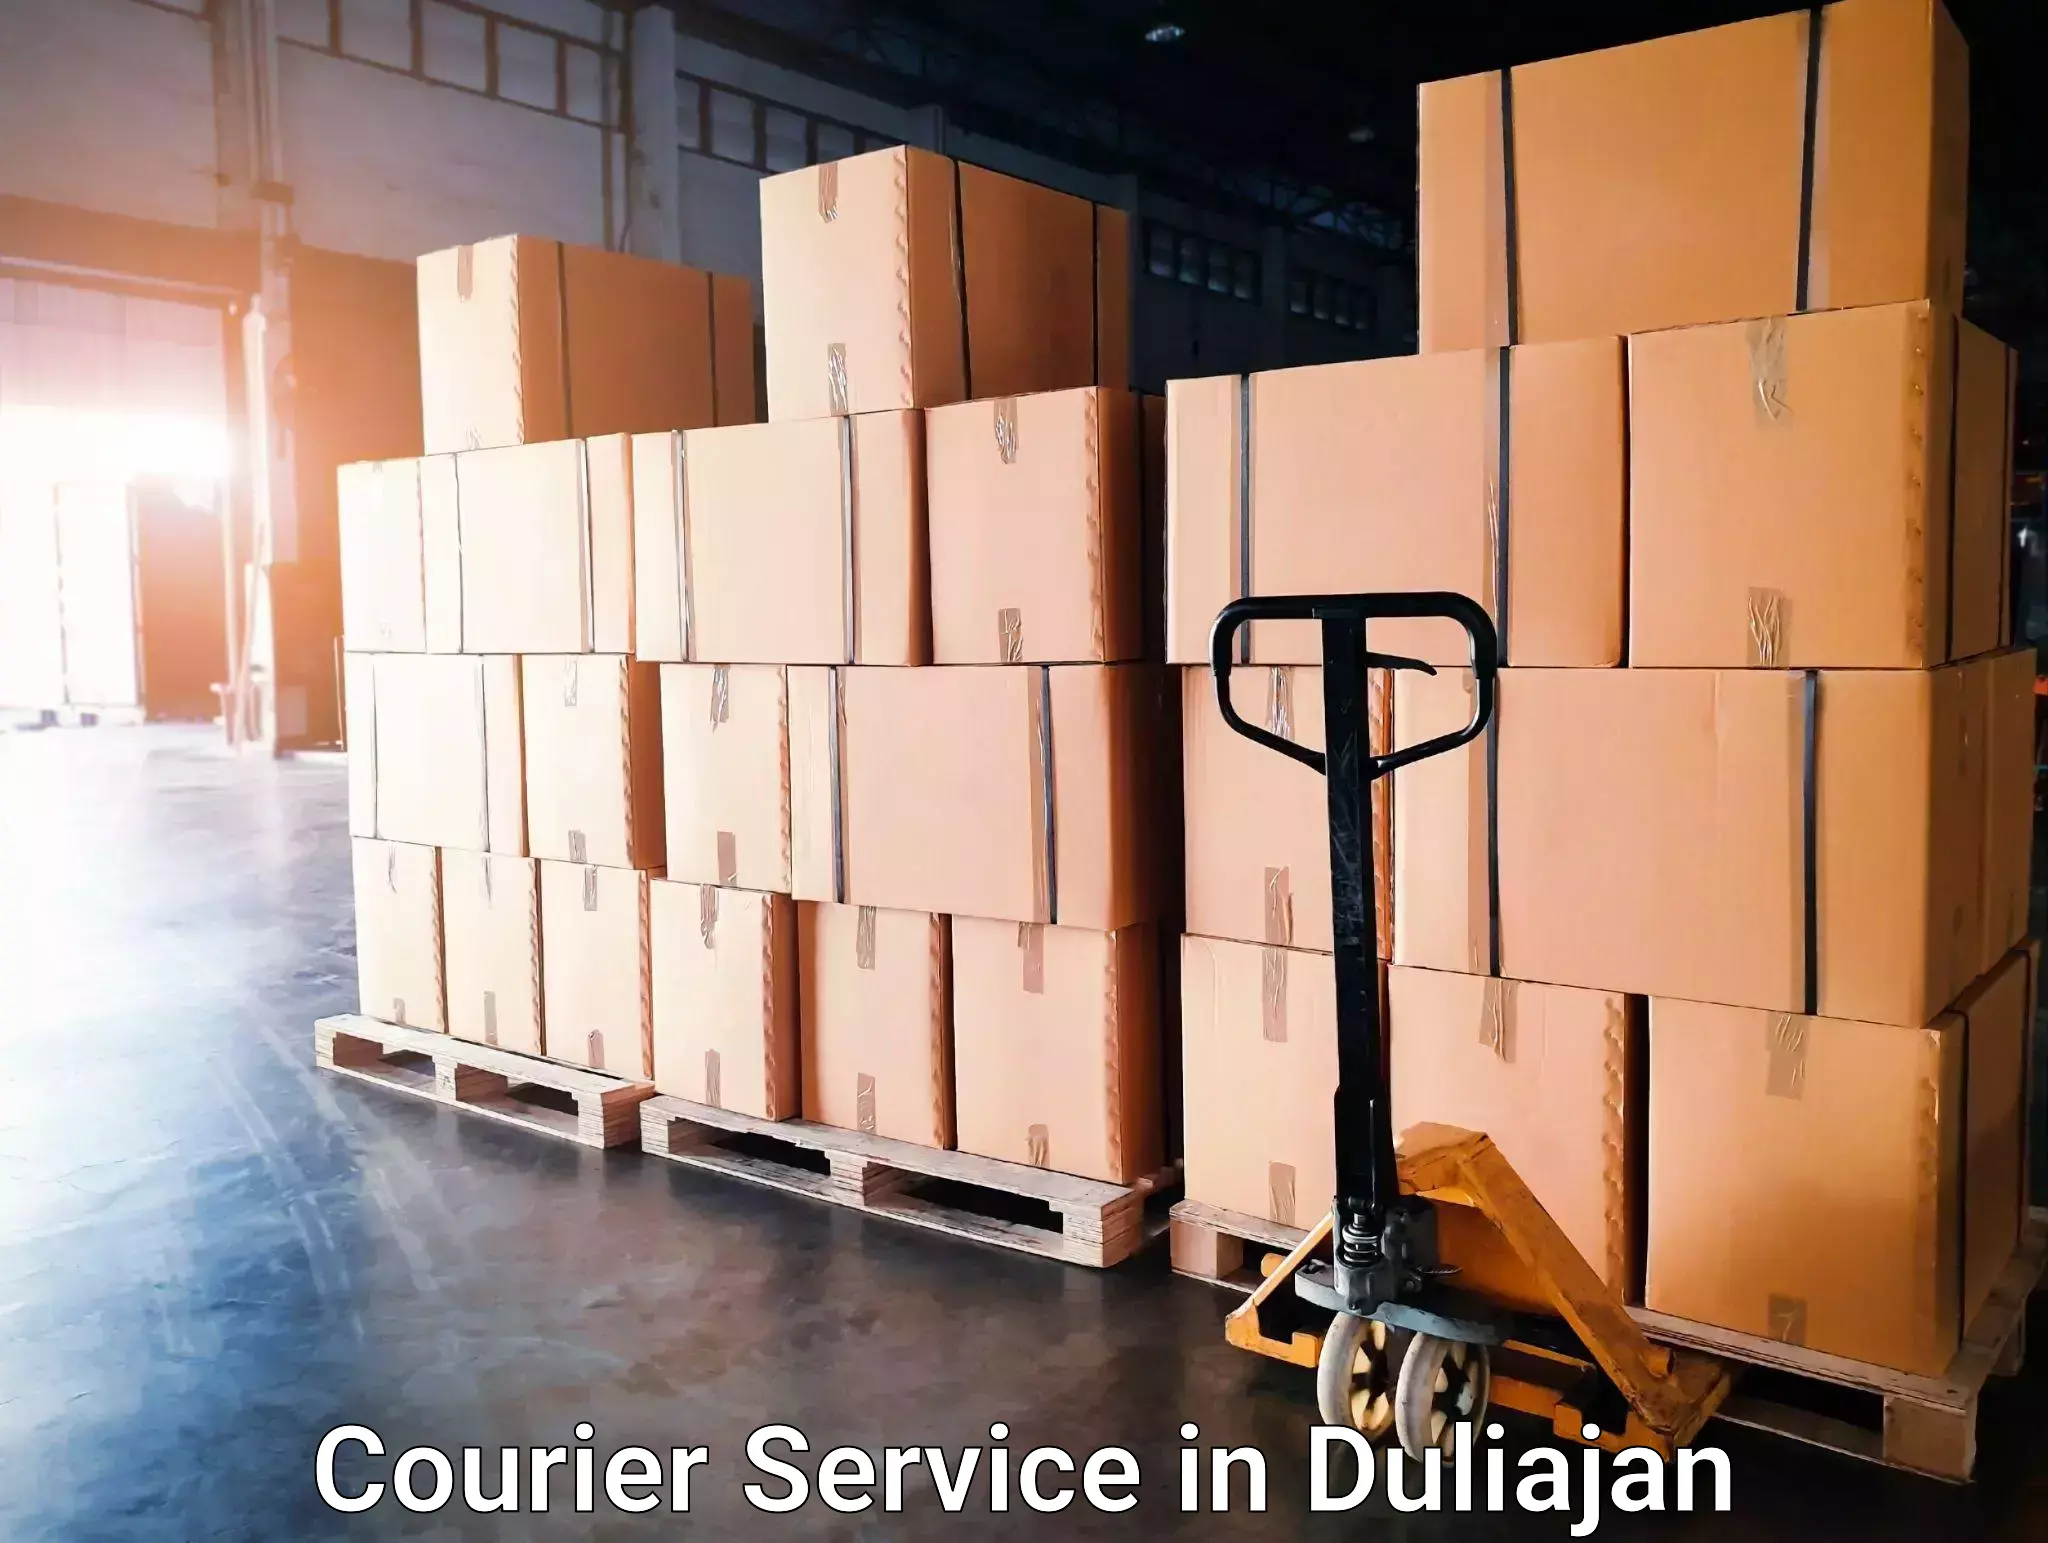 Express package services in Duliajan